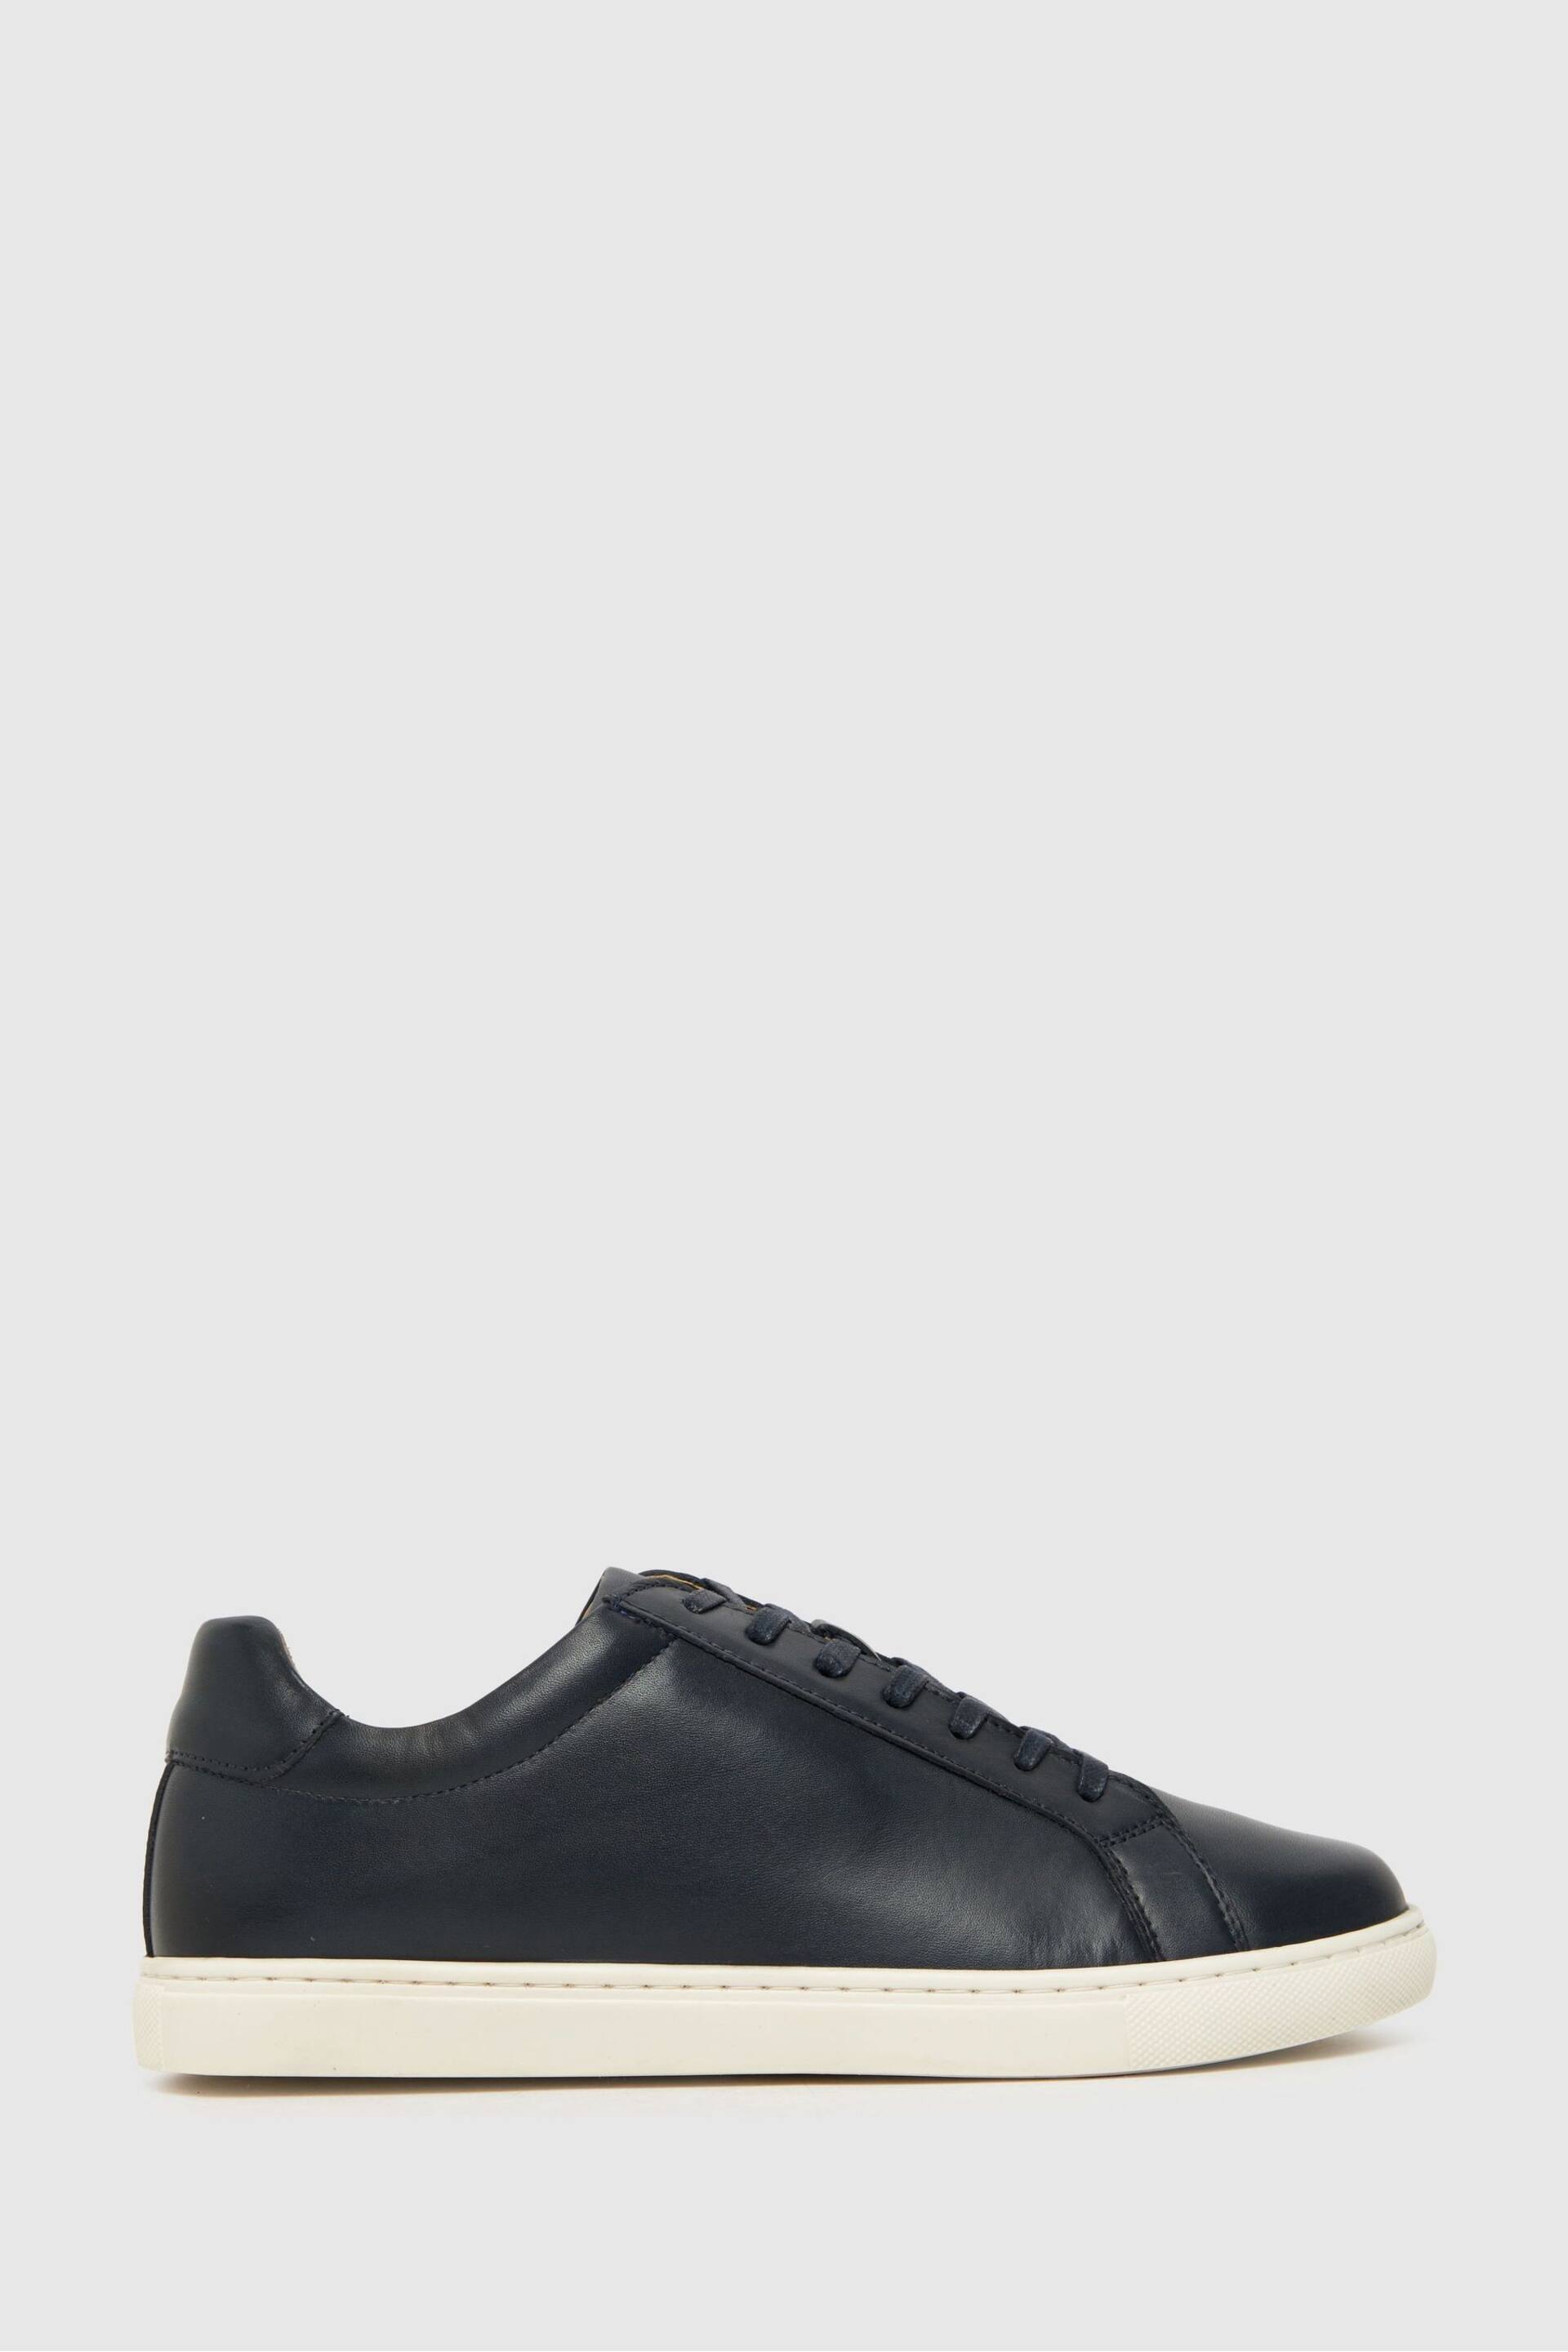 Schuh Wayne Leather Trainers - Image 1 of 4